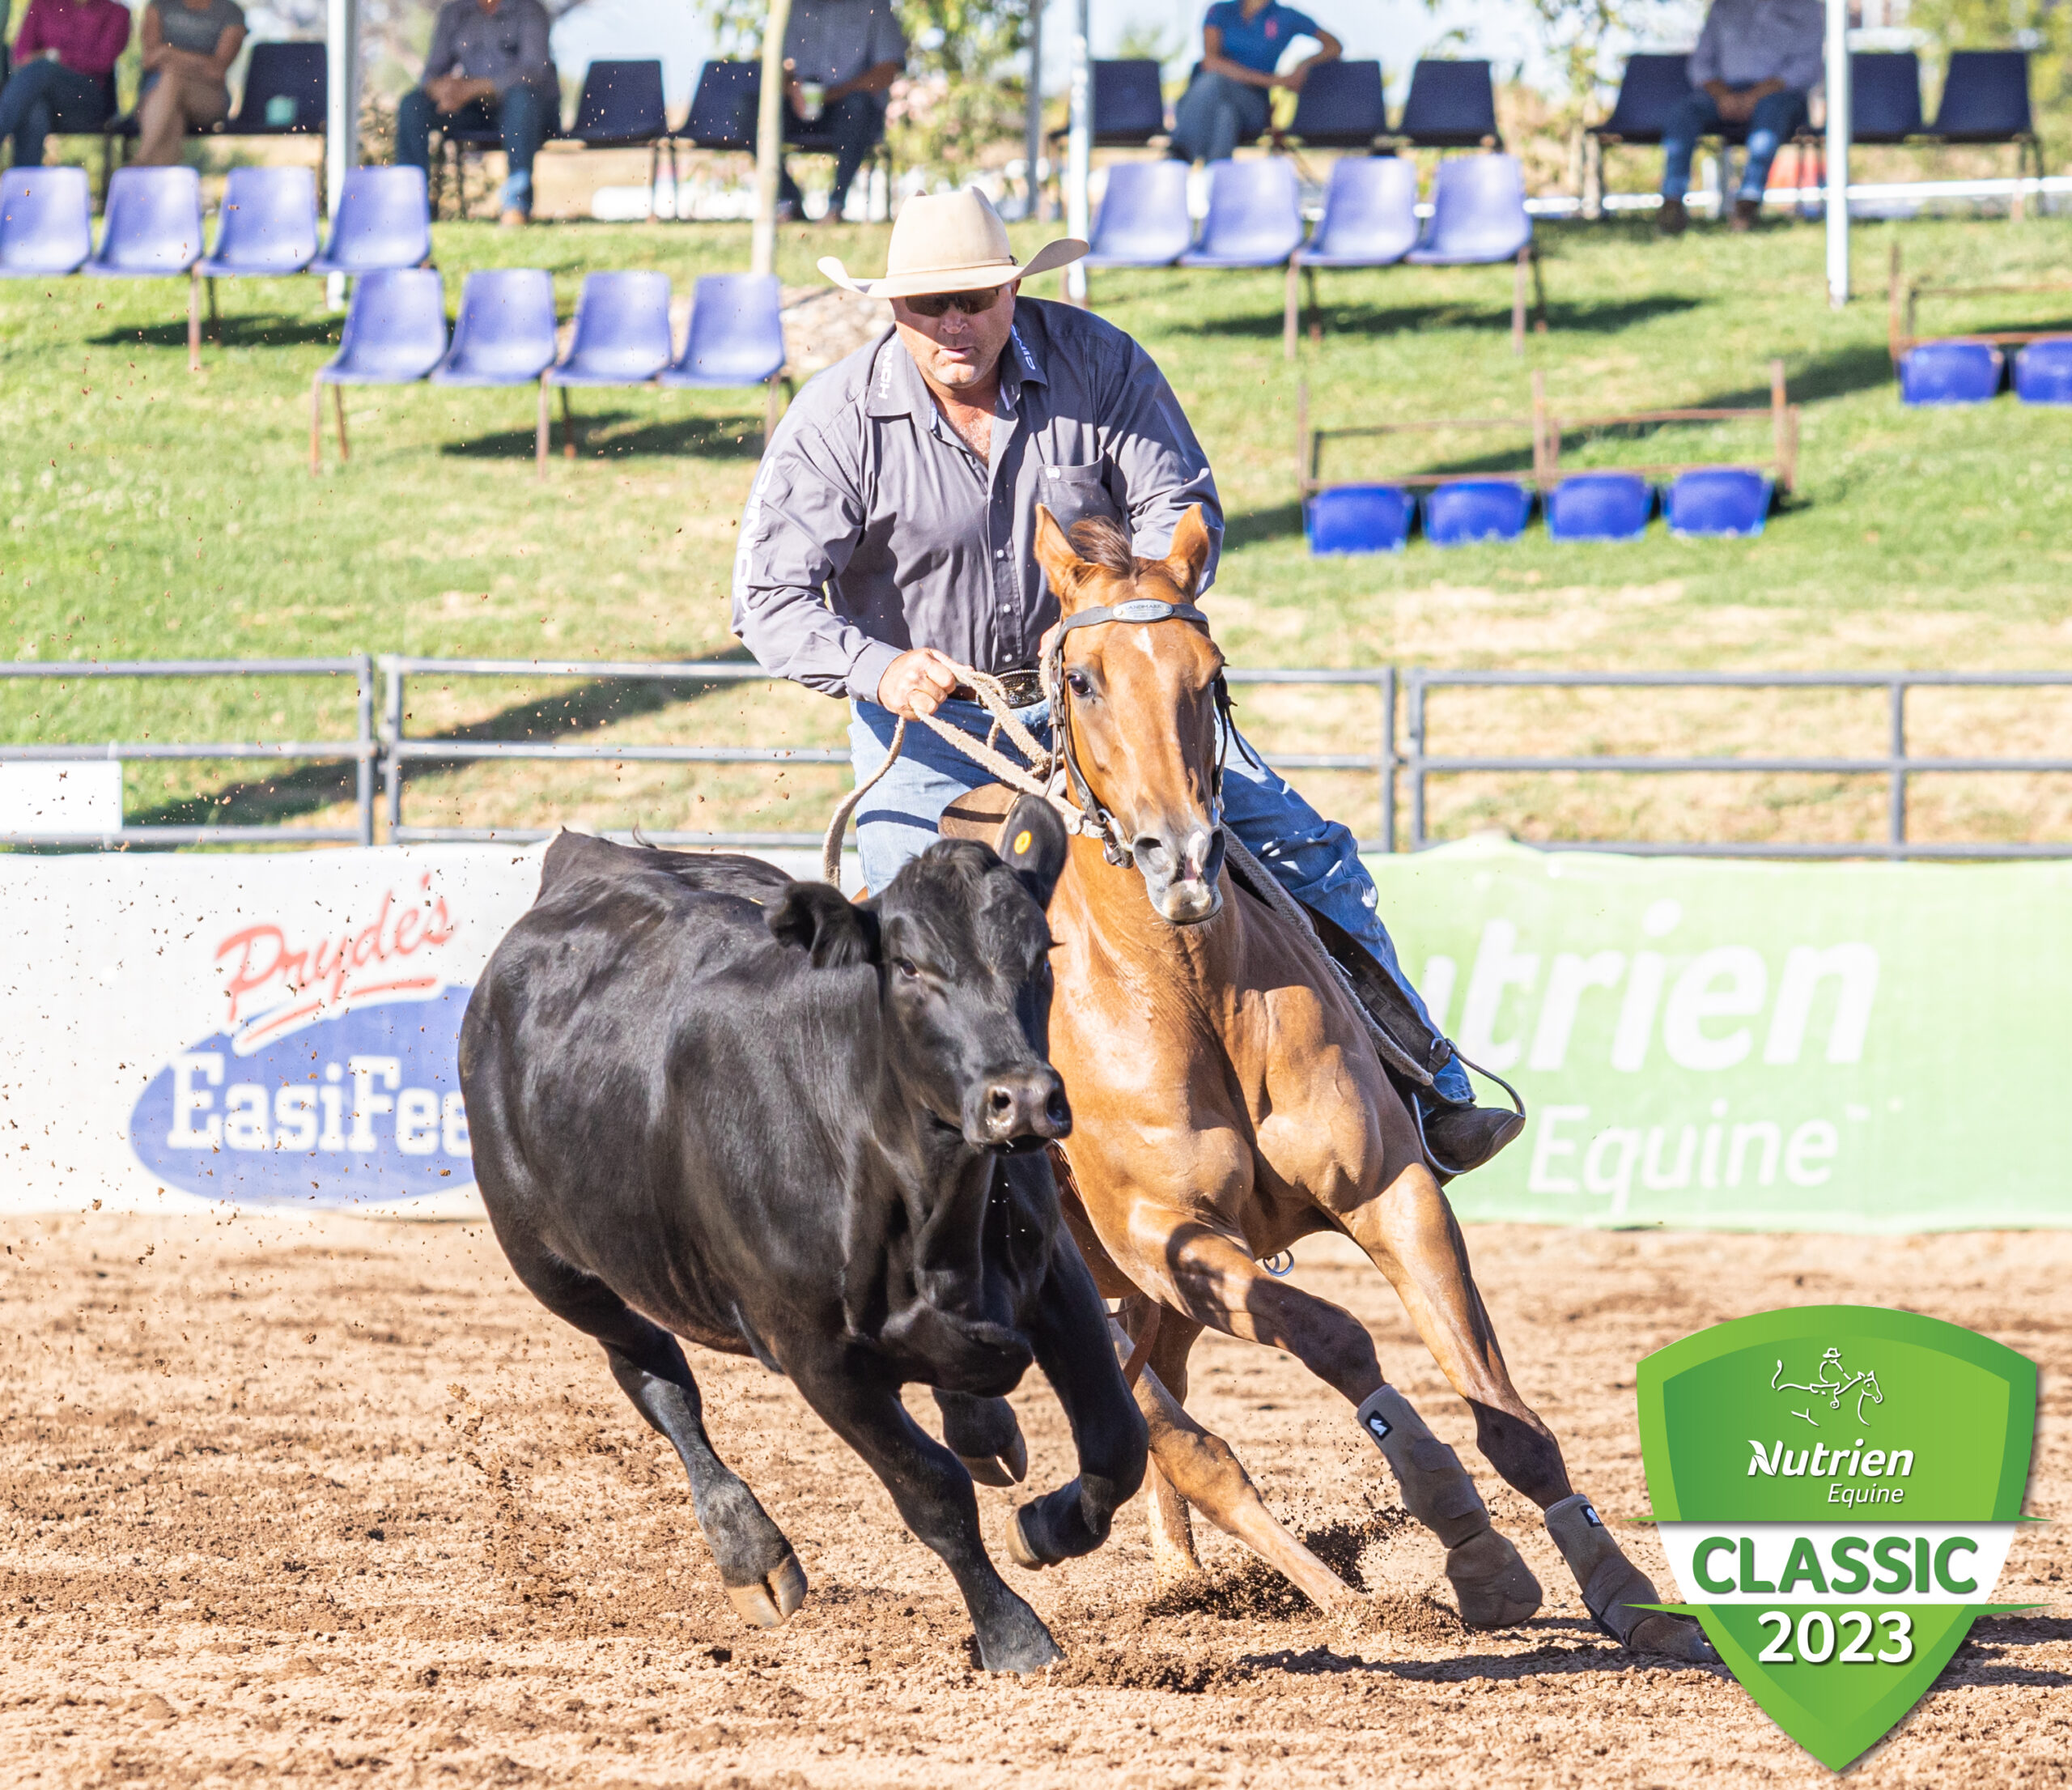 The 16th Nutrien Classic Campdraft & Sale is underway